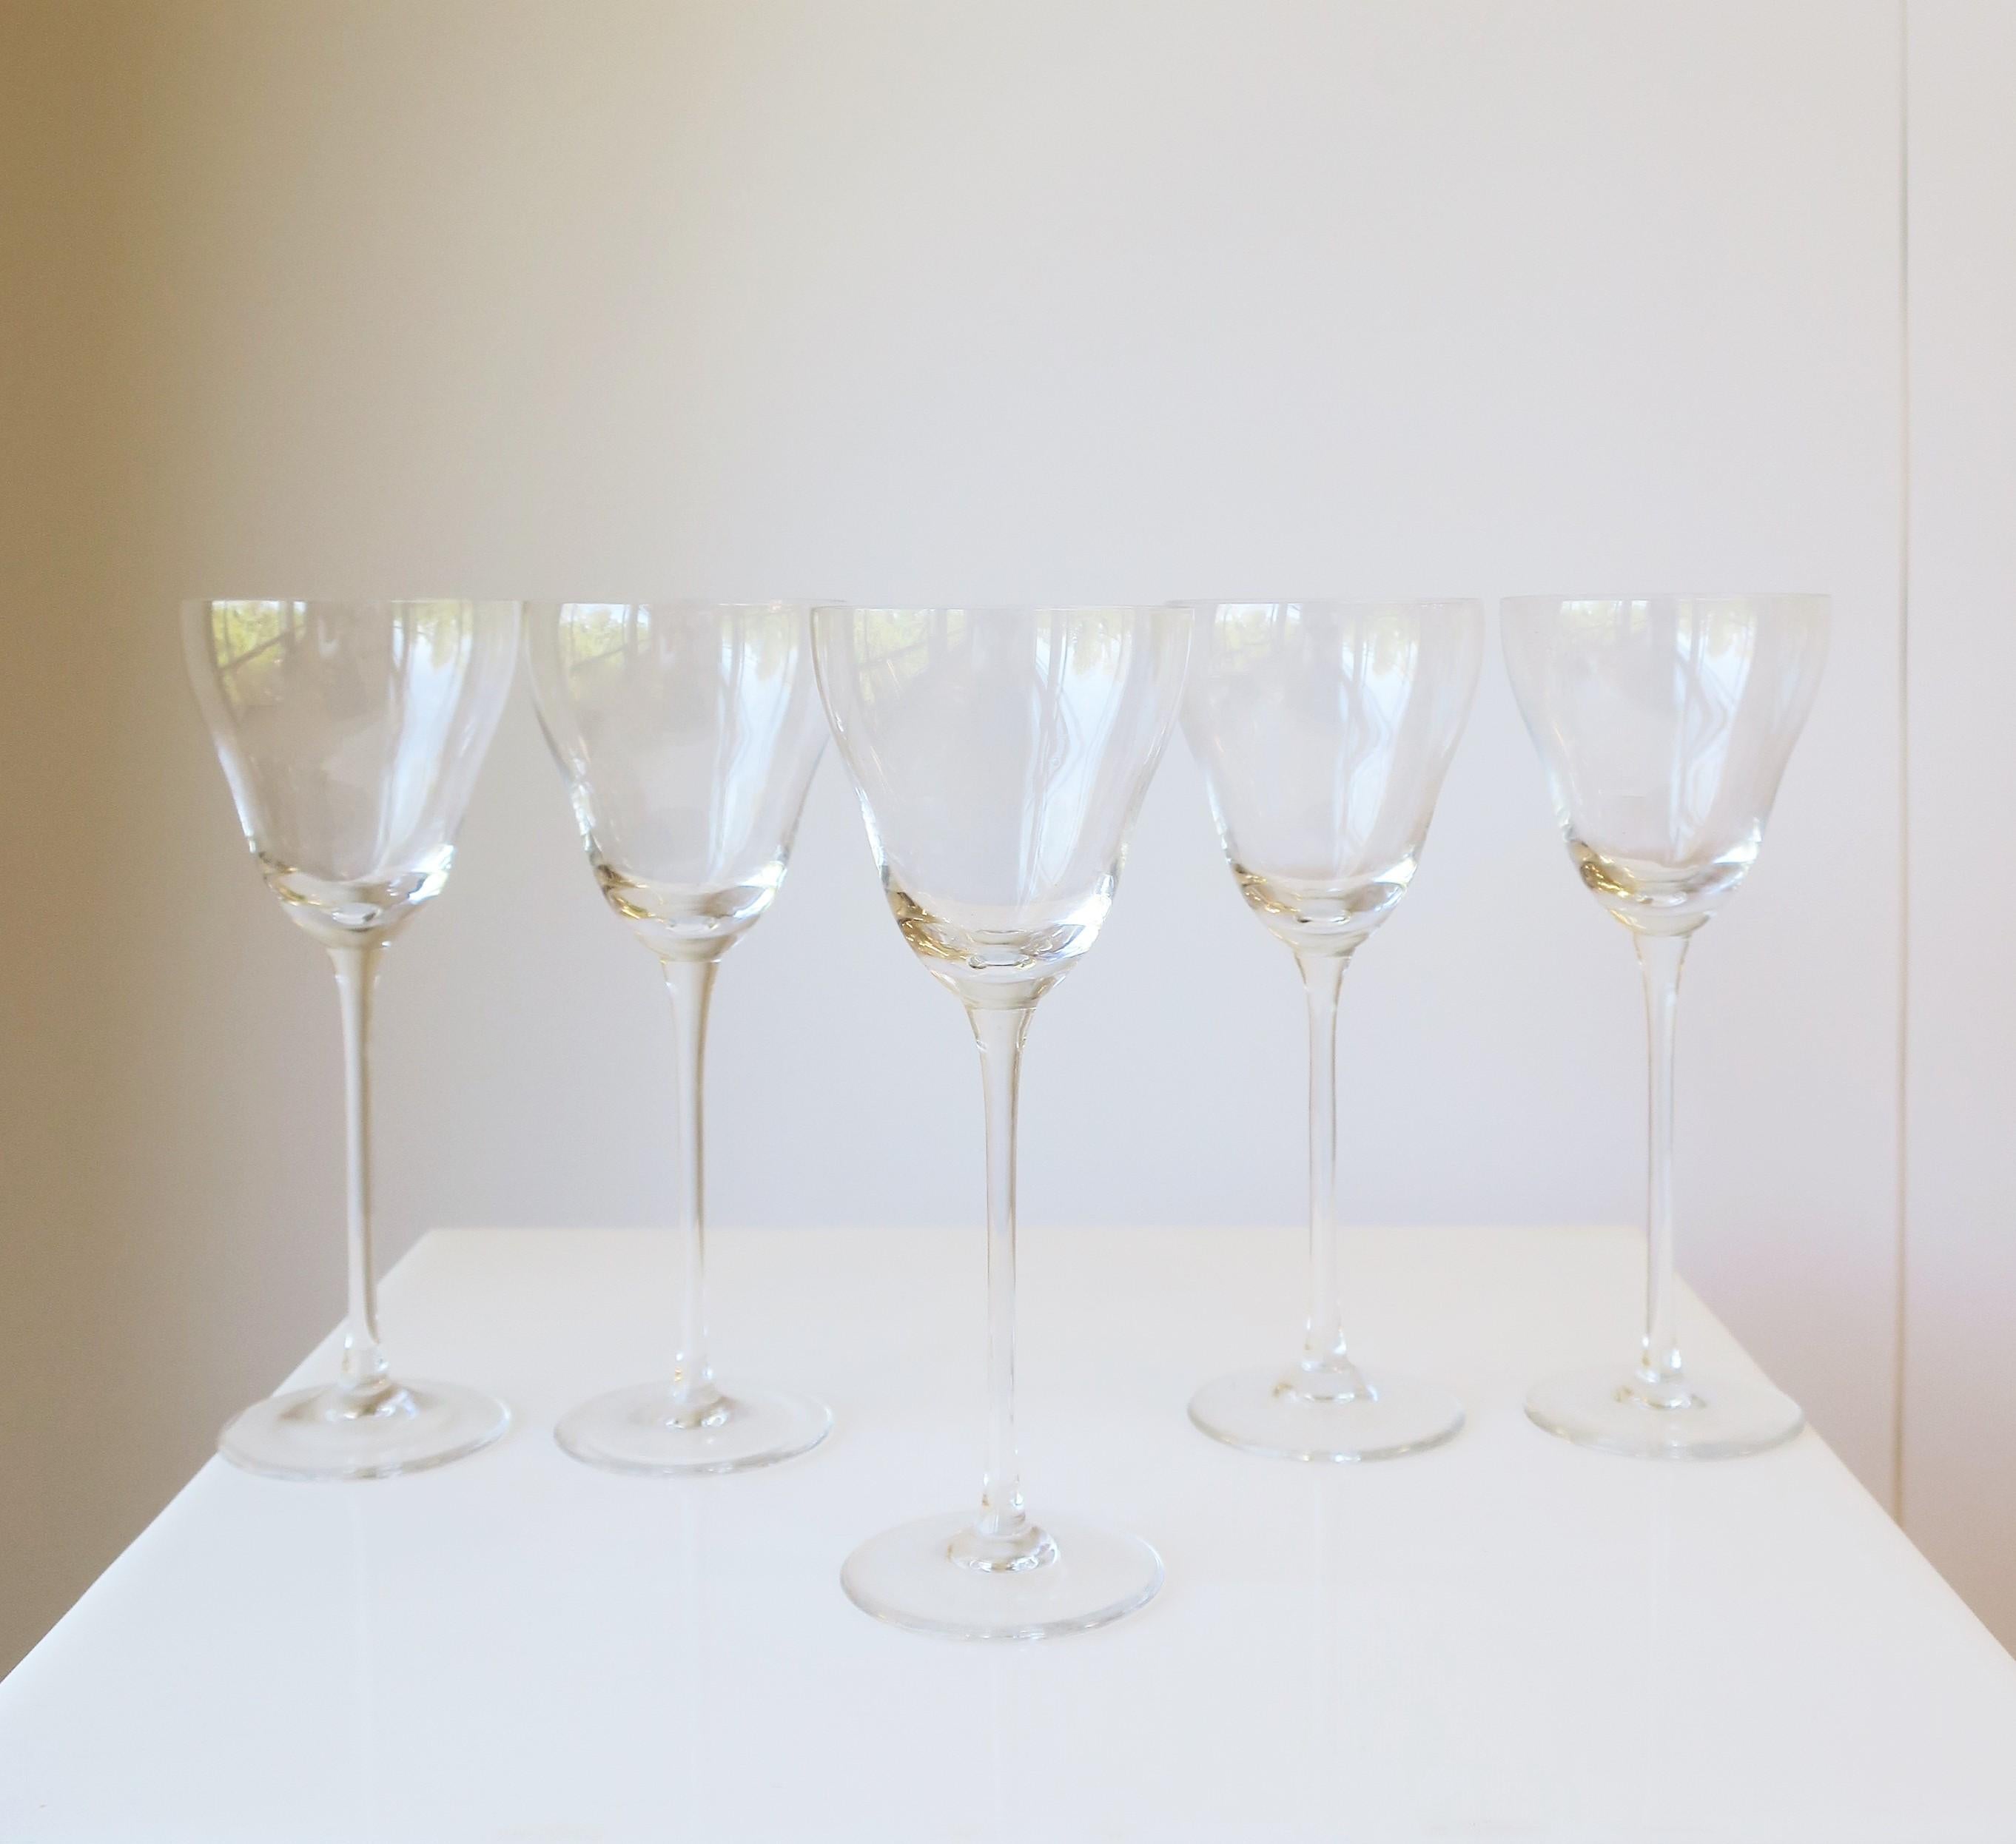 Rosenthal Studio-Line German Crystal Cocktail or Aperitif Glasses, Set of 5 In Good Condition For Sale In New York, NY